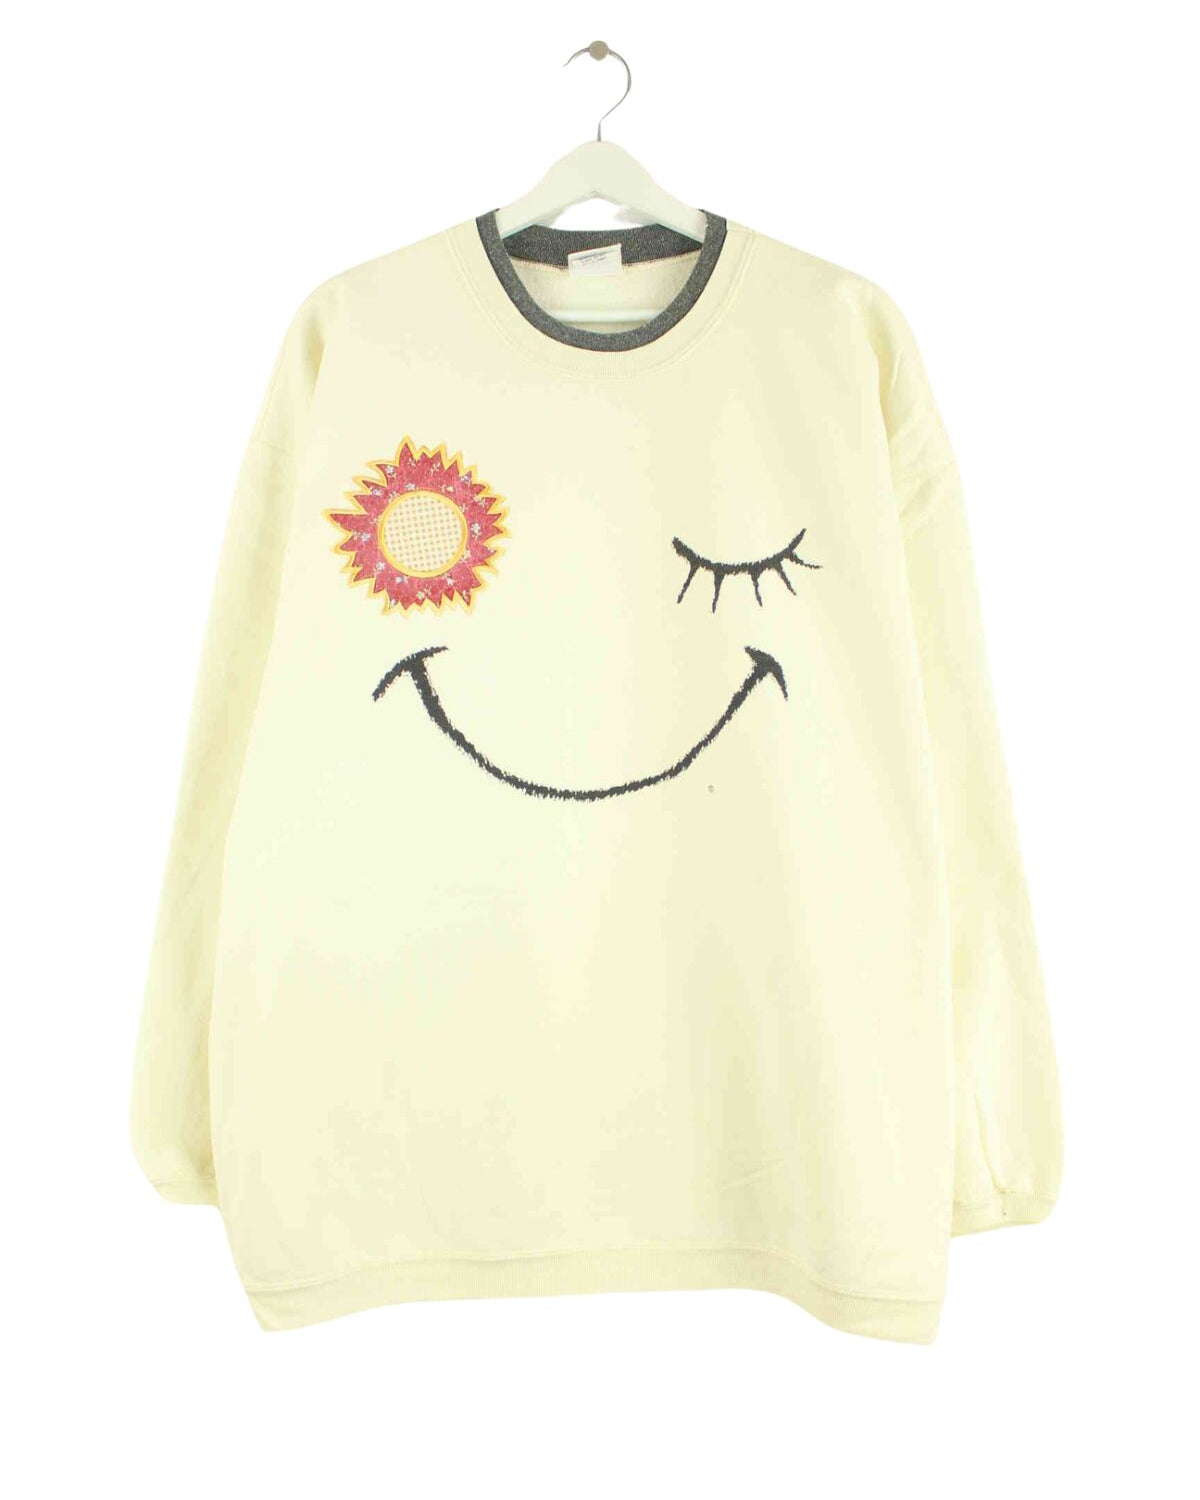 Vintage 80s Embroidered Sun Sweater Beige XL (front image)